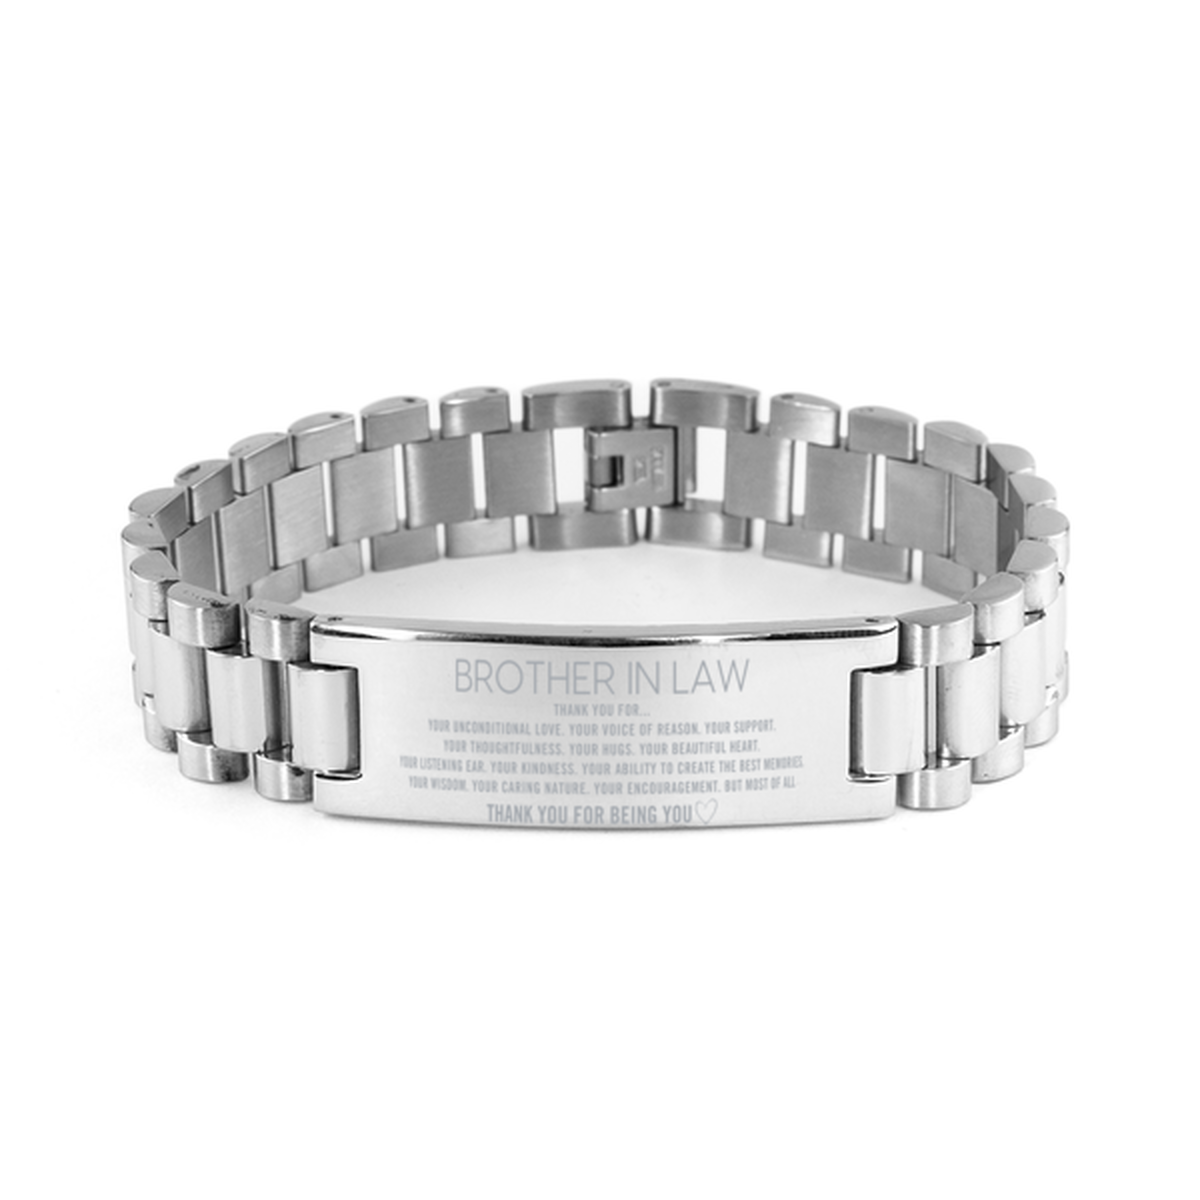 Brother In Law Ladder Stainless Steel Bracelet Custom, Engraved Gifts For Brother In Law Christmas Graduation Birthday Gifts for Men Women Brother In Law Thank you for Your unconditional love